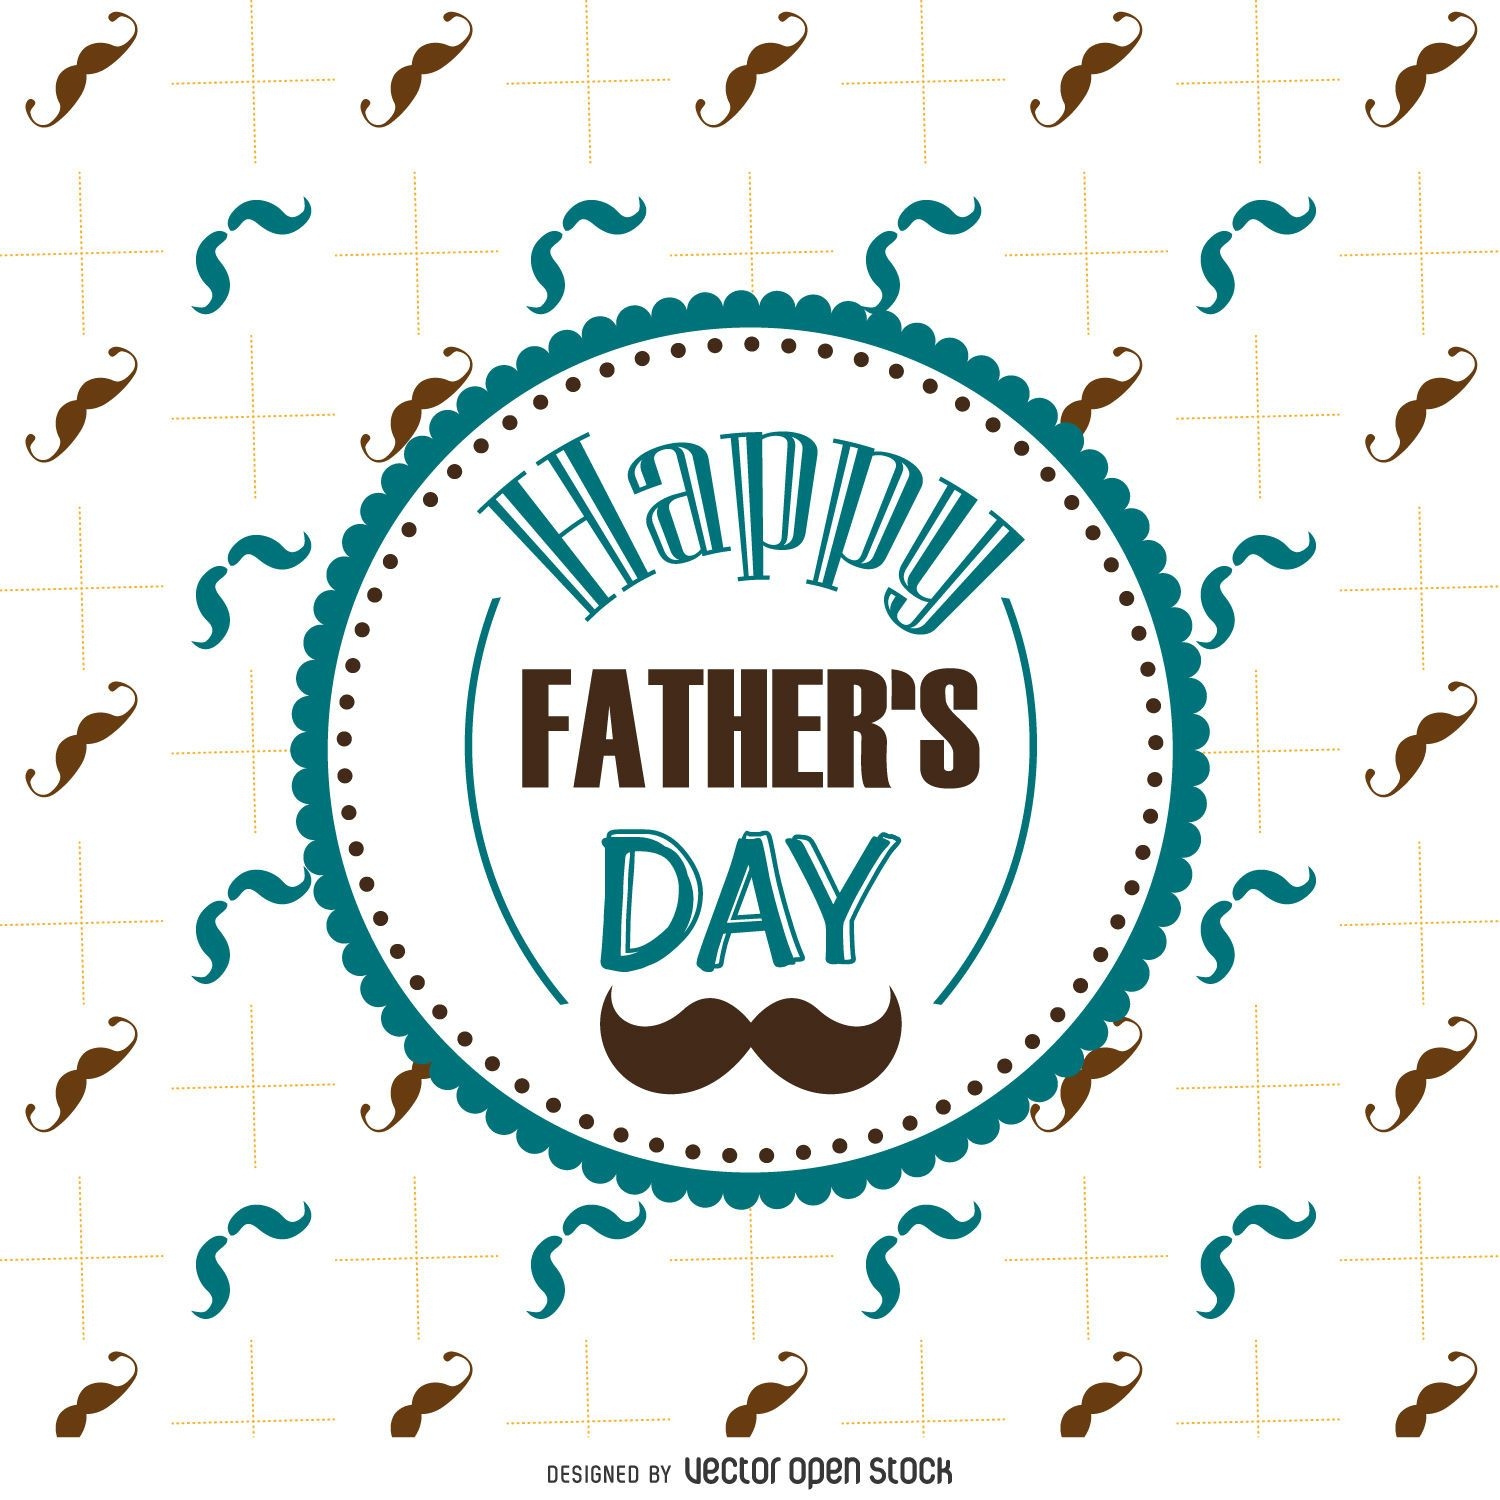 father-s-day-moustache-pattern-vector-download